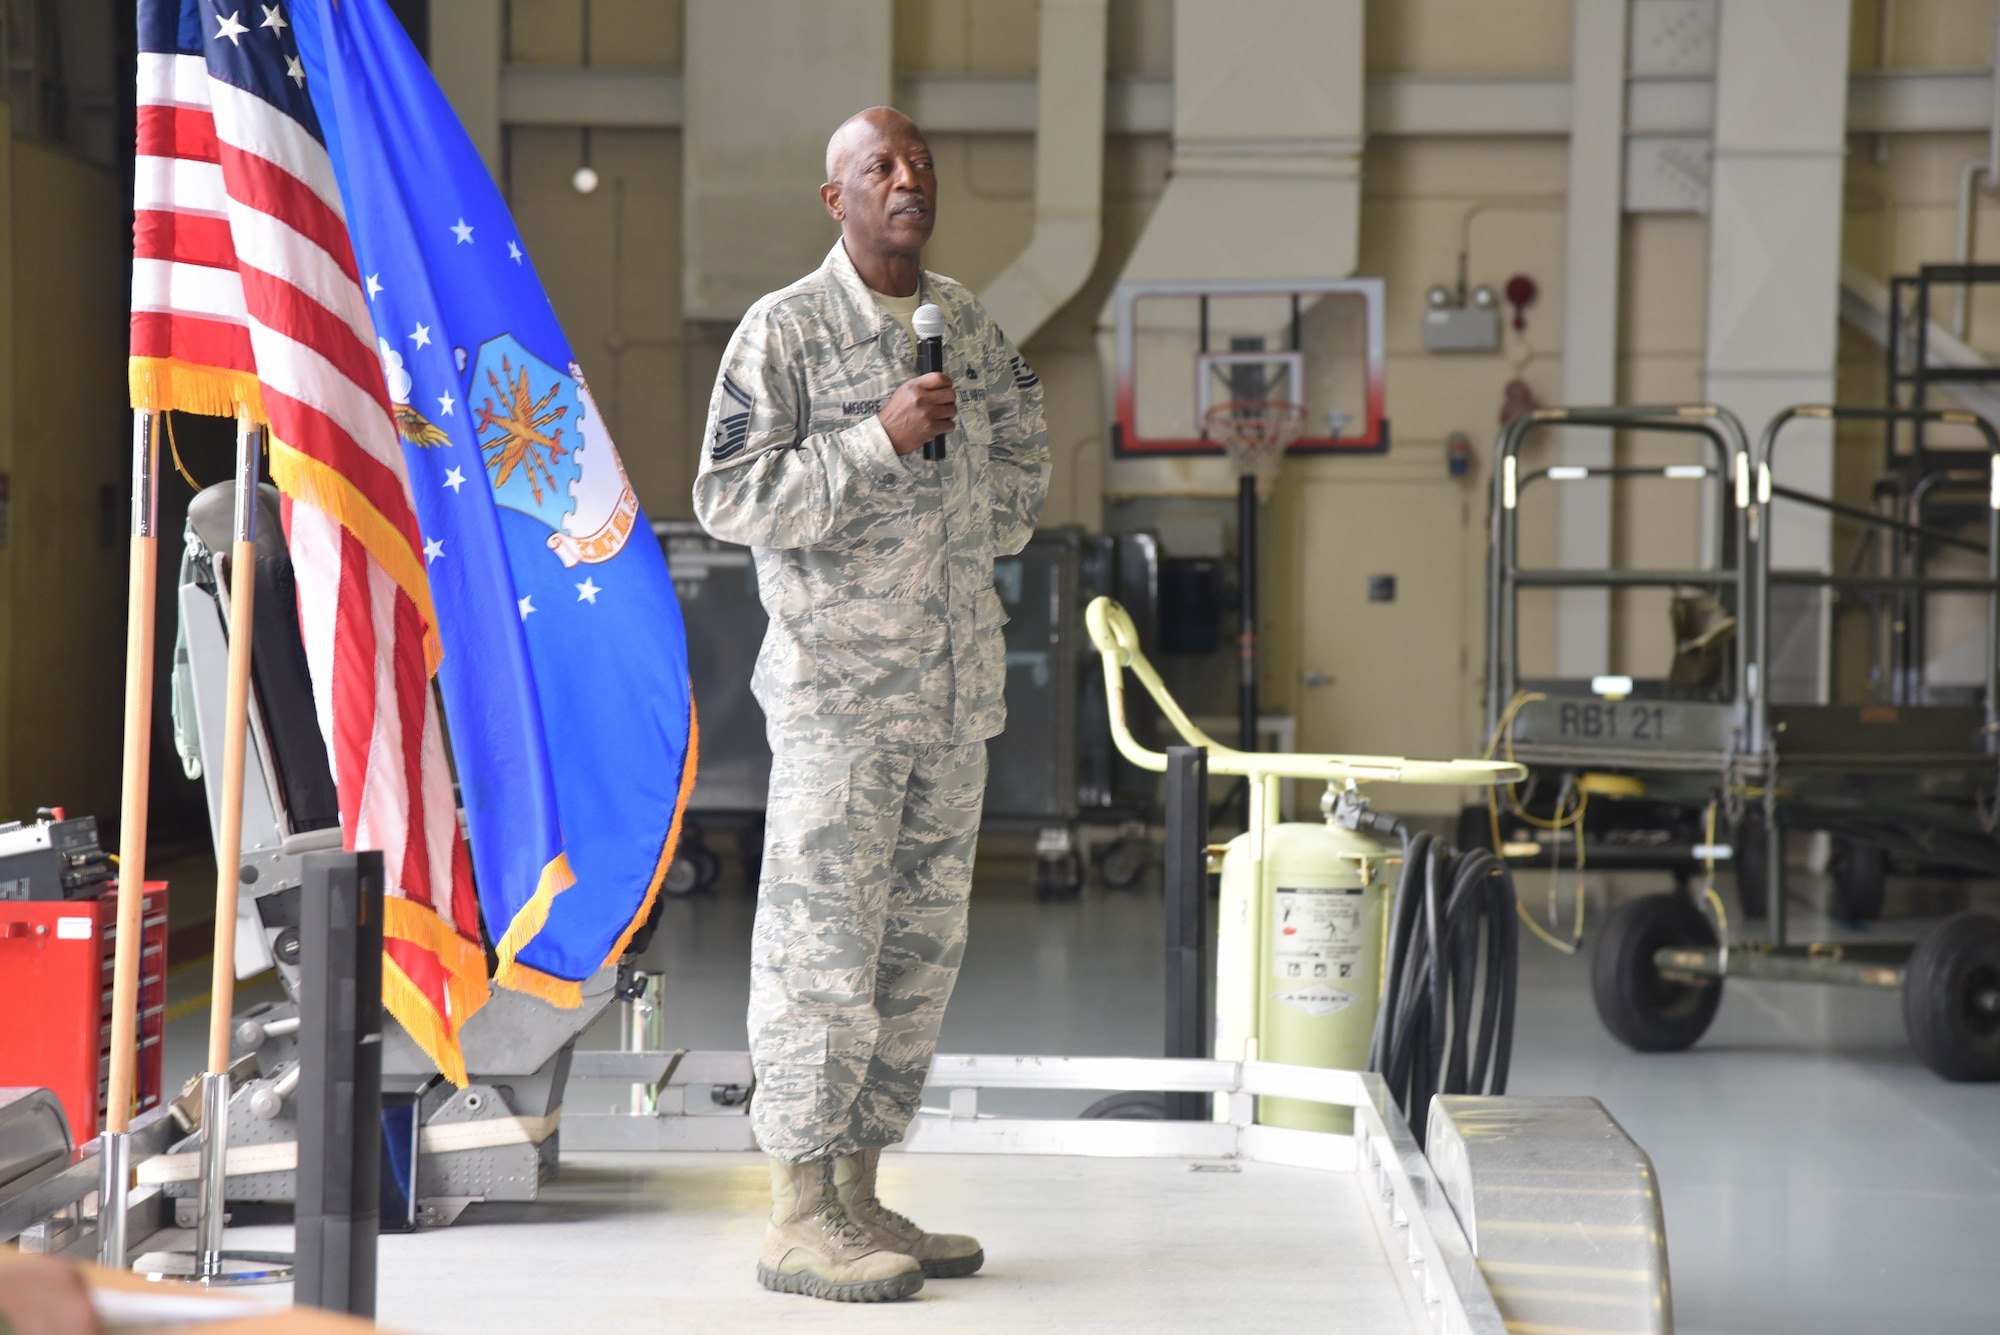 Senior Master Sgt. Charles Moore, 803rd Aircraft Maintenance Squadron production superintendent, addresses gathering during his retirement ceremony, March 8, 2019.  Moore offiicially retires from a 33 year military career, April 1, 2019. (U.S. Air Force photo by TSgt. Michael Farrar)